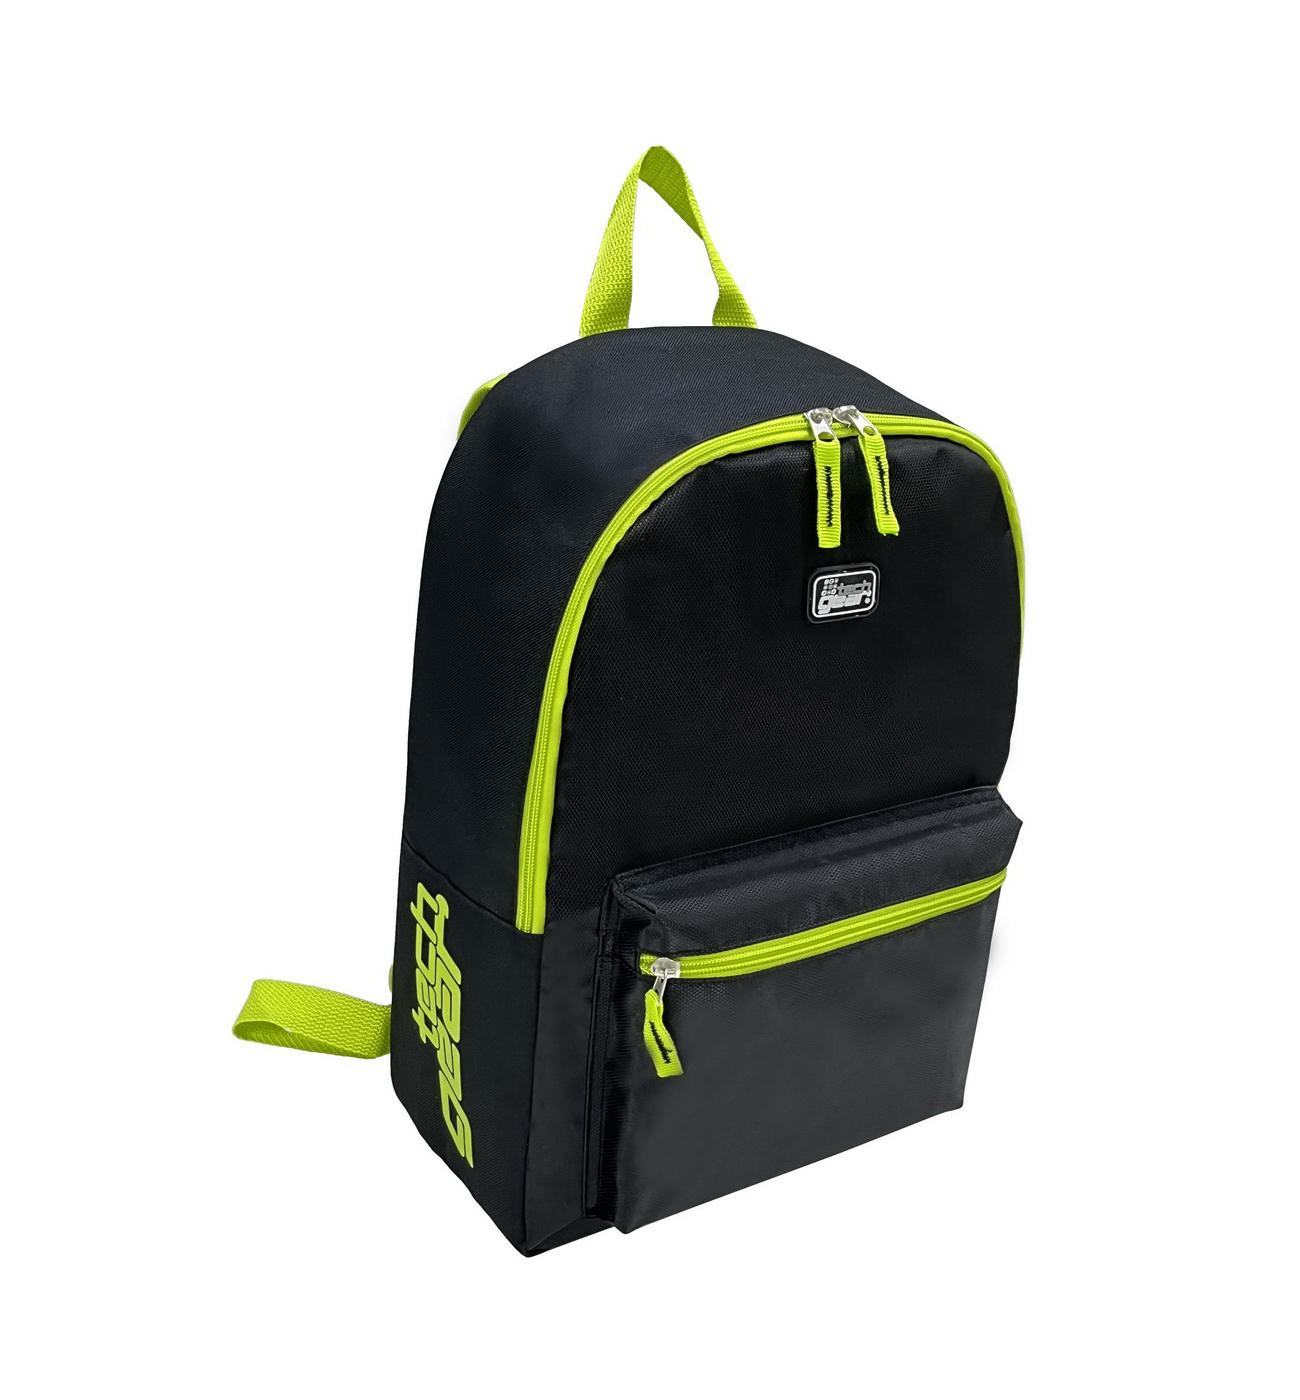 Tech Gear Classic Backpack - Black & Green; image 4 of 4